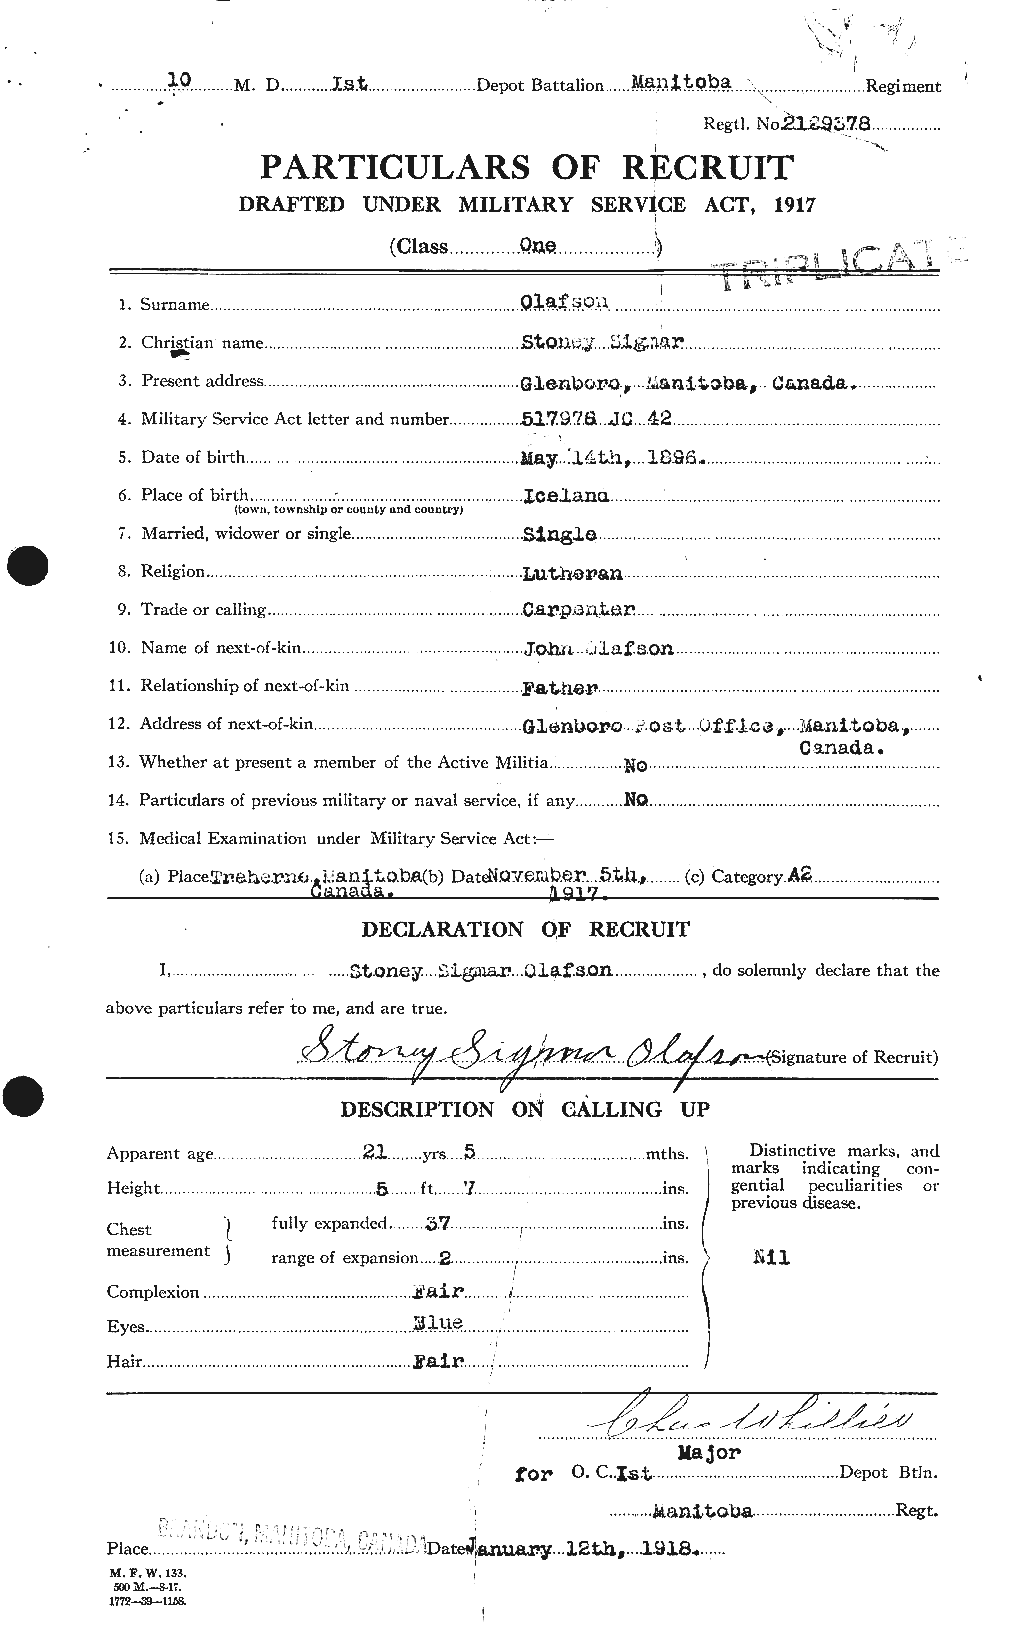 Personnel Records of the First World War - CEF 556417a